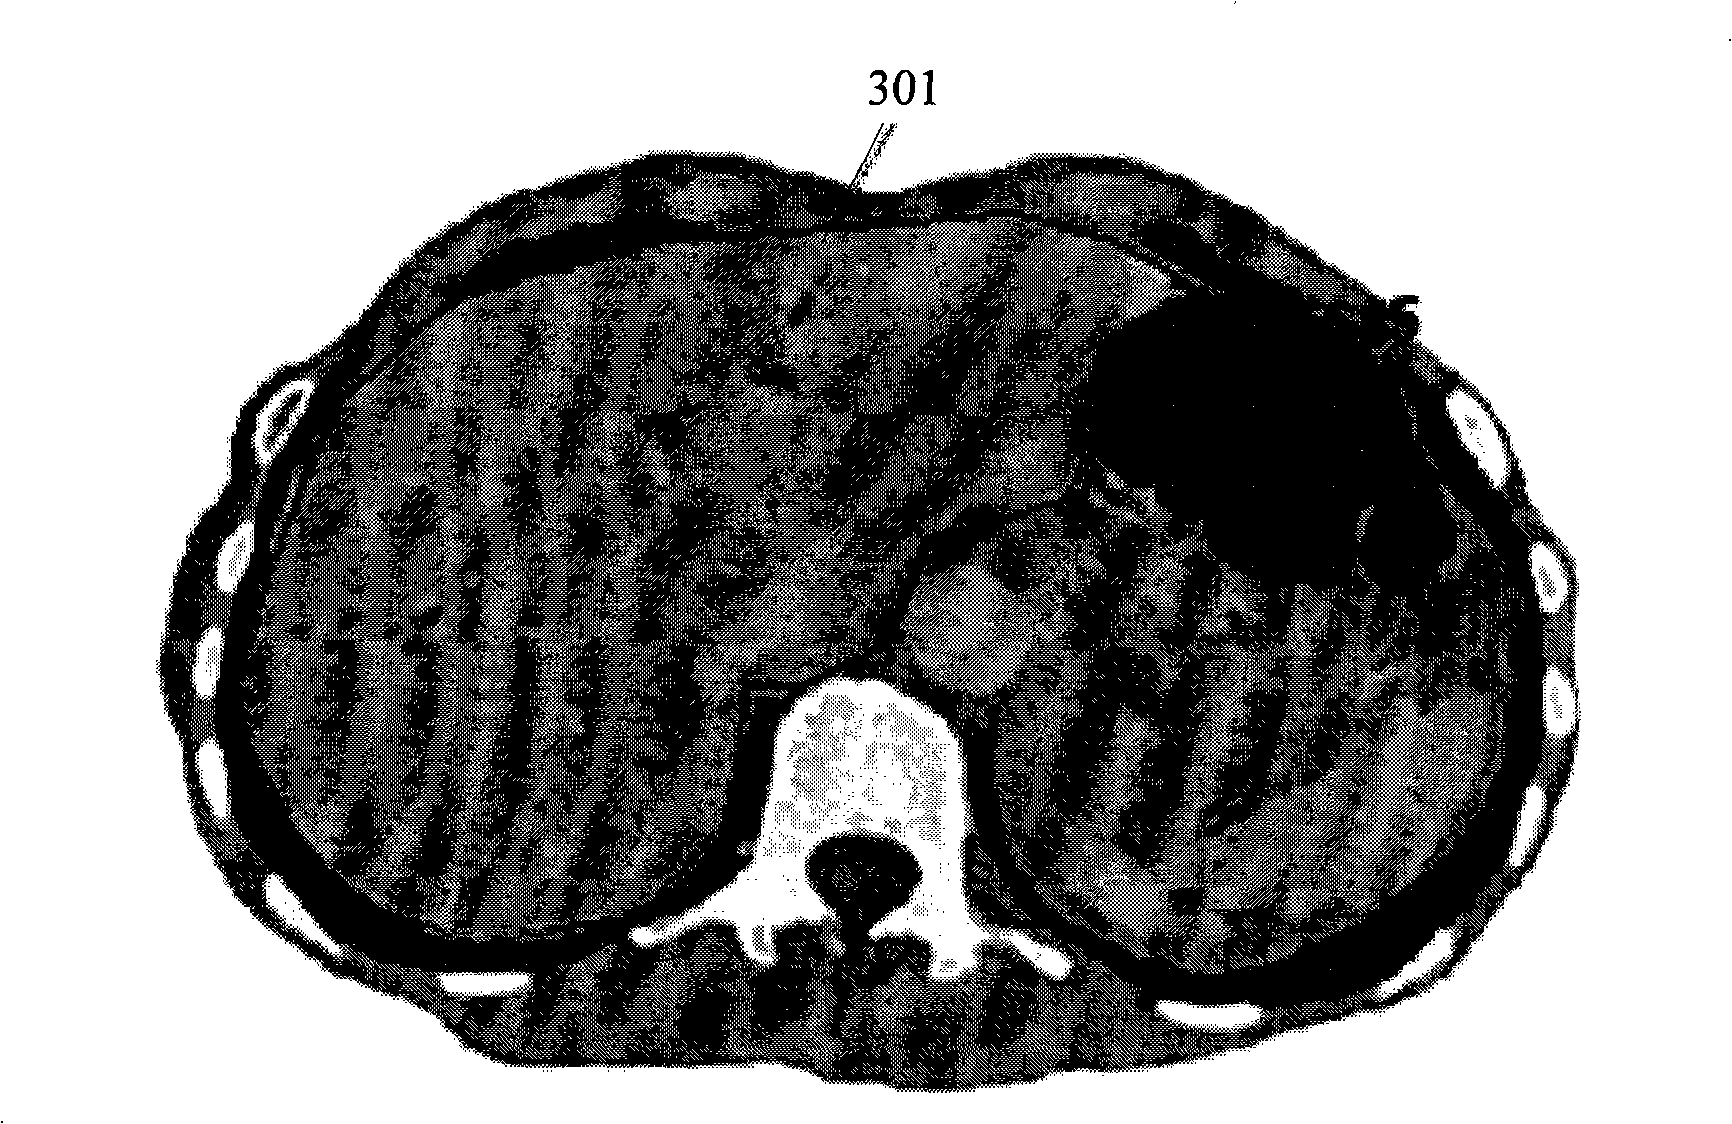 Three-dimensional visualization method and device